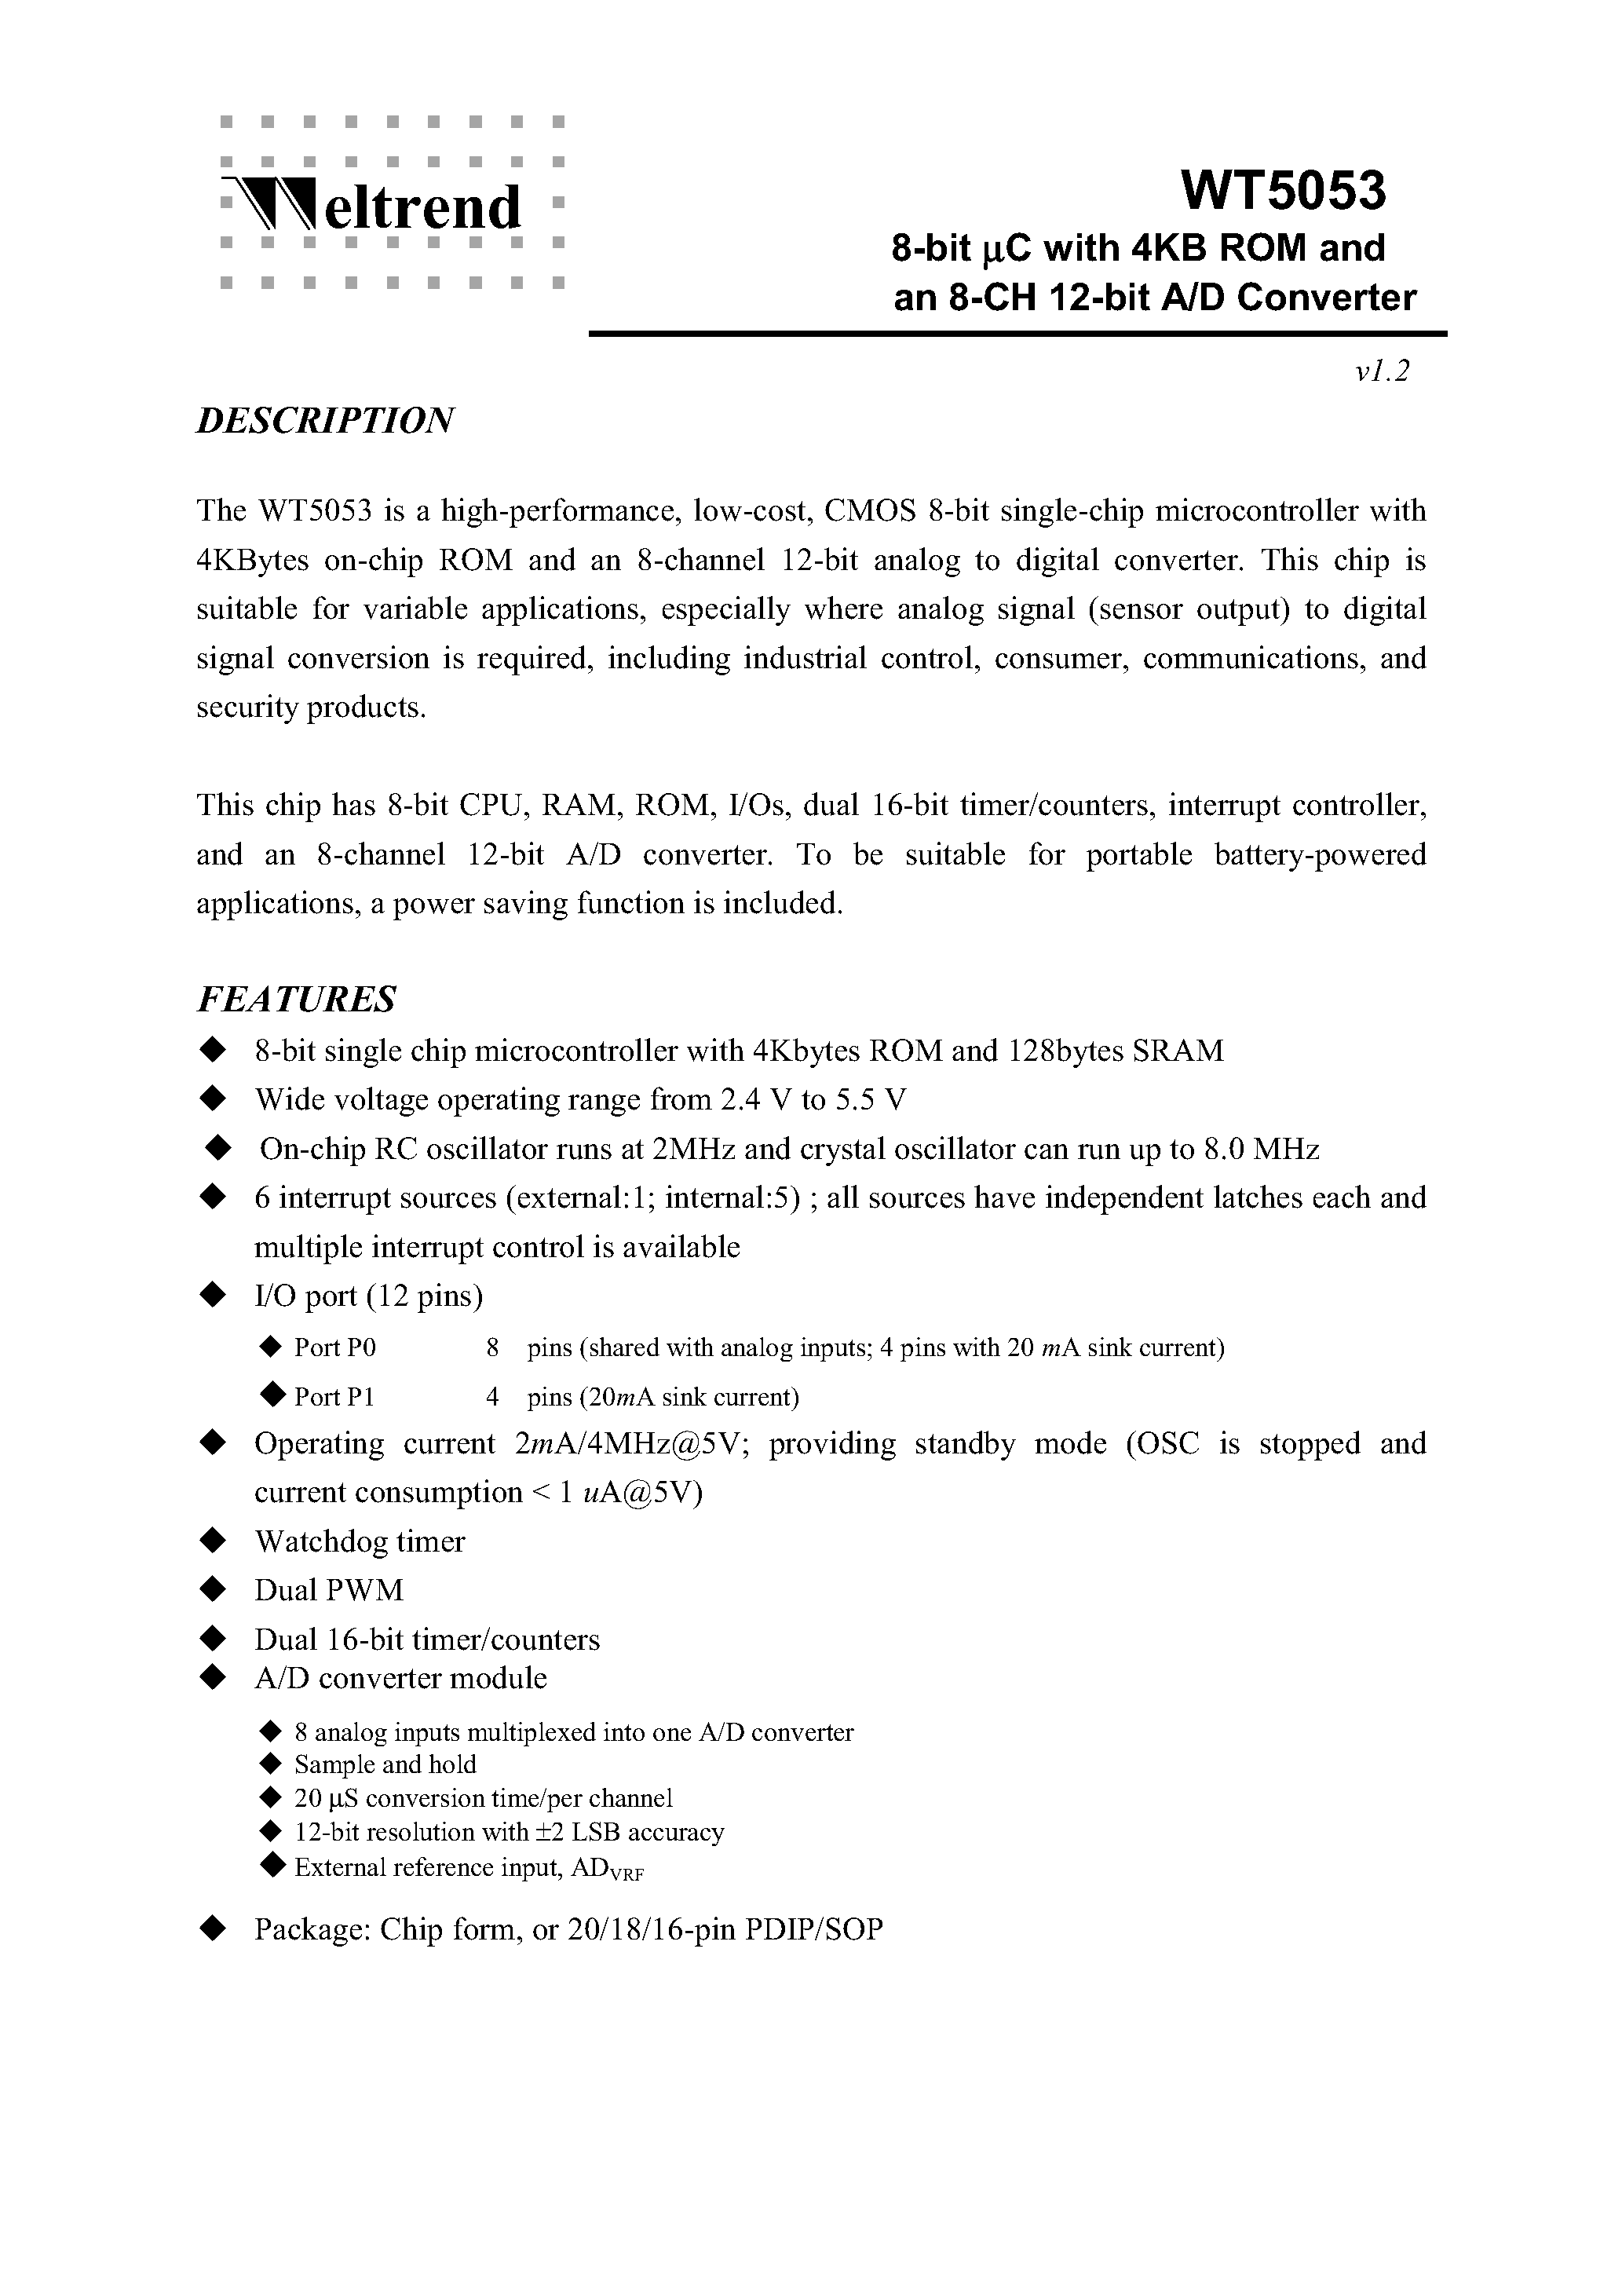 Datasheet WT5053 - 8-bit C with 4KB ROM and an 8CH 12-bit A/D Converter page 1